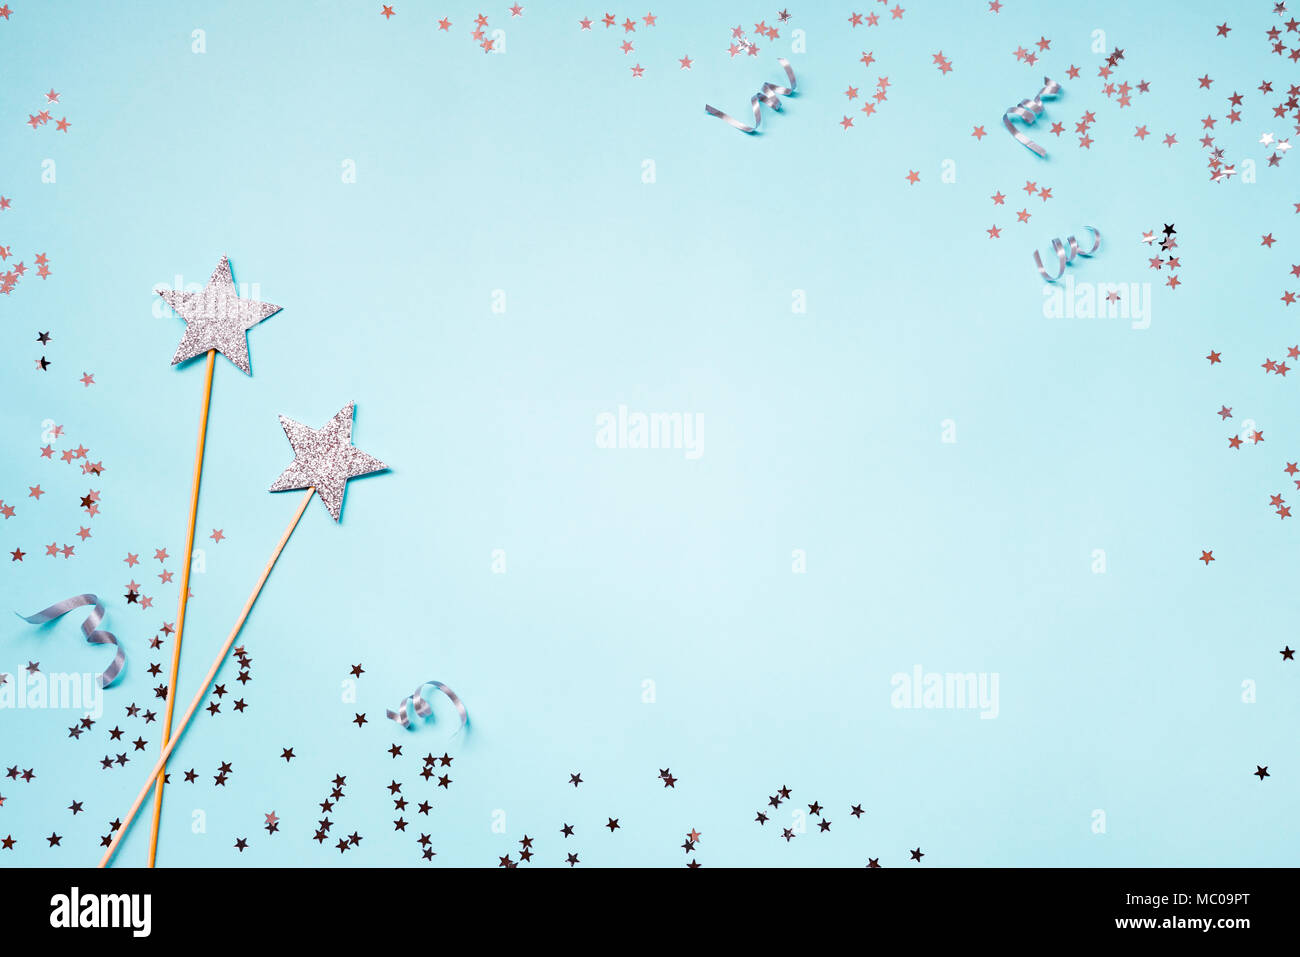 Two silver party magic wands, sequins and ribbons on a blue background. Copy space. Stock Photo